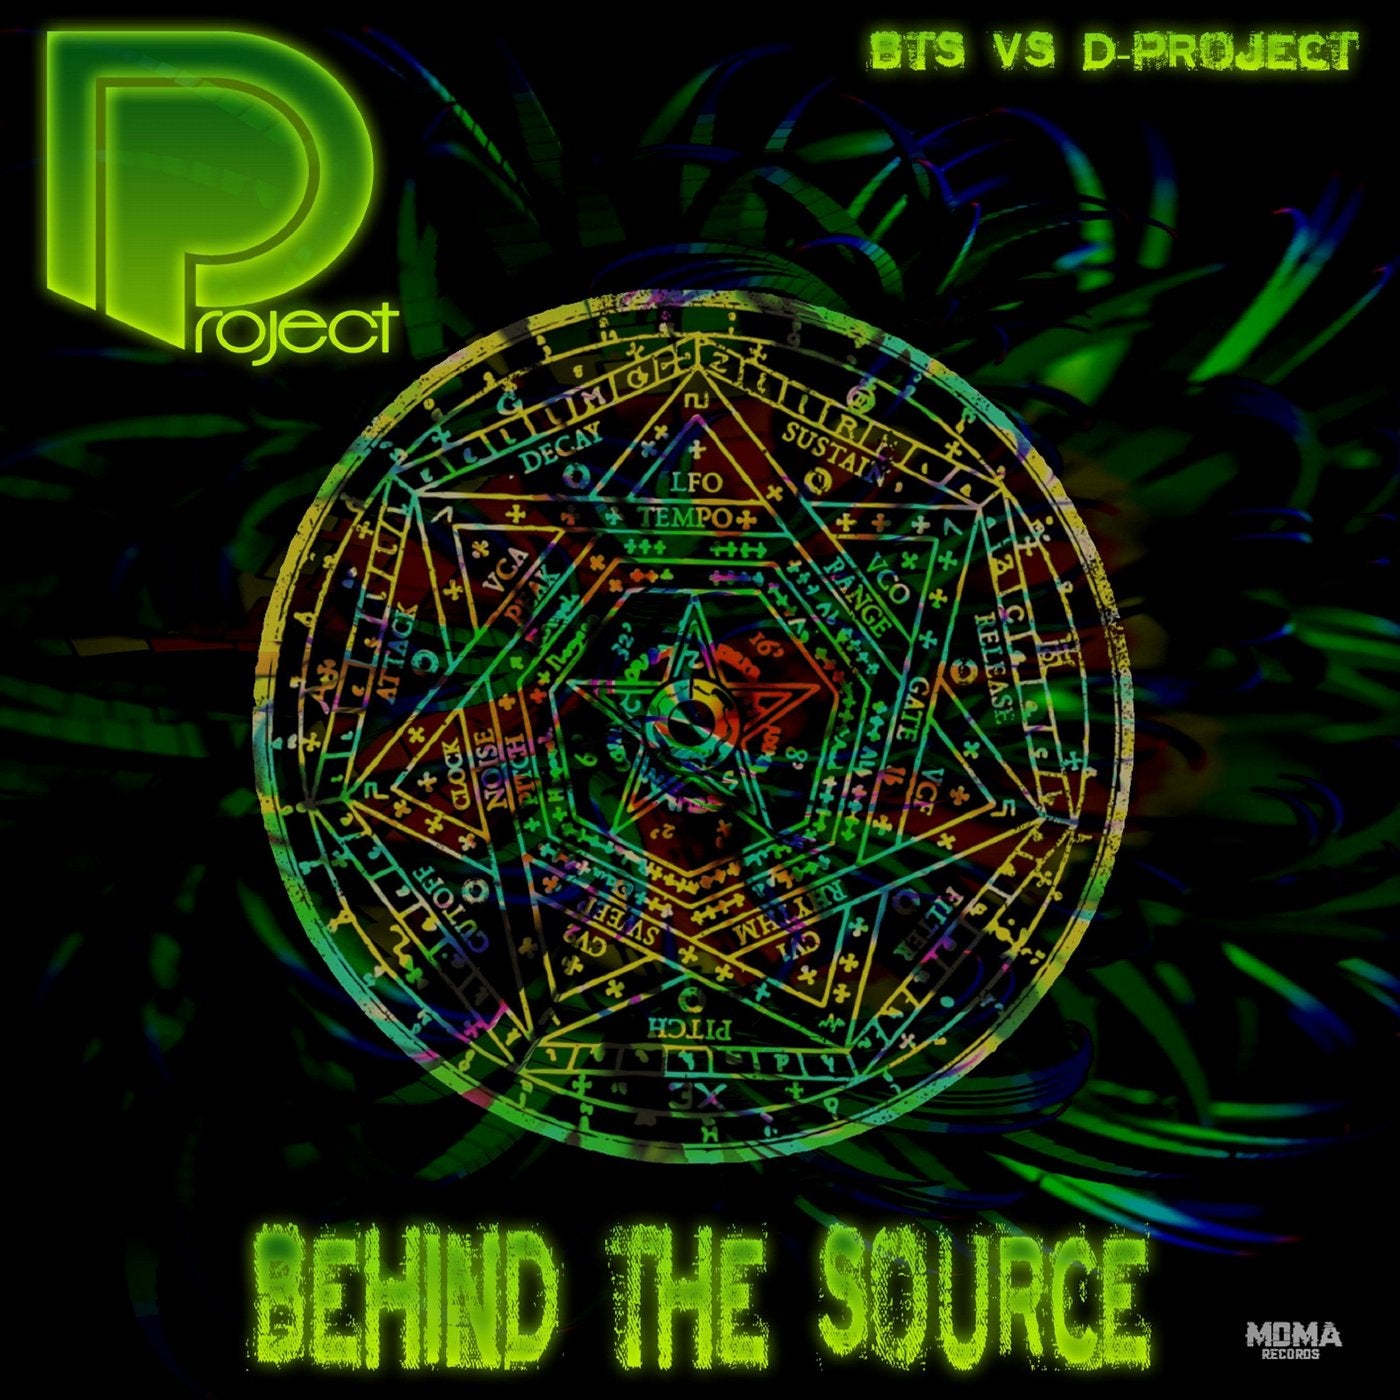 Behind the Source